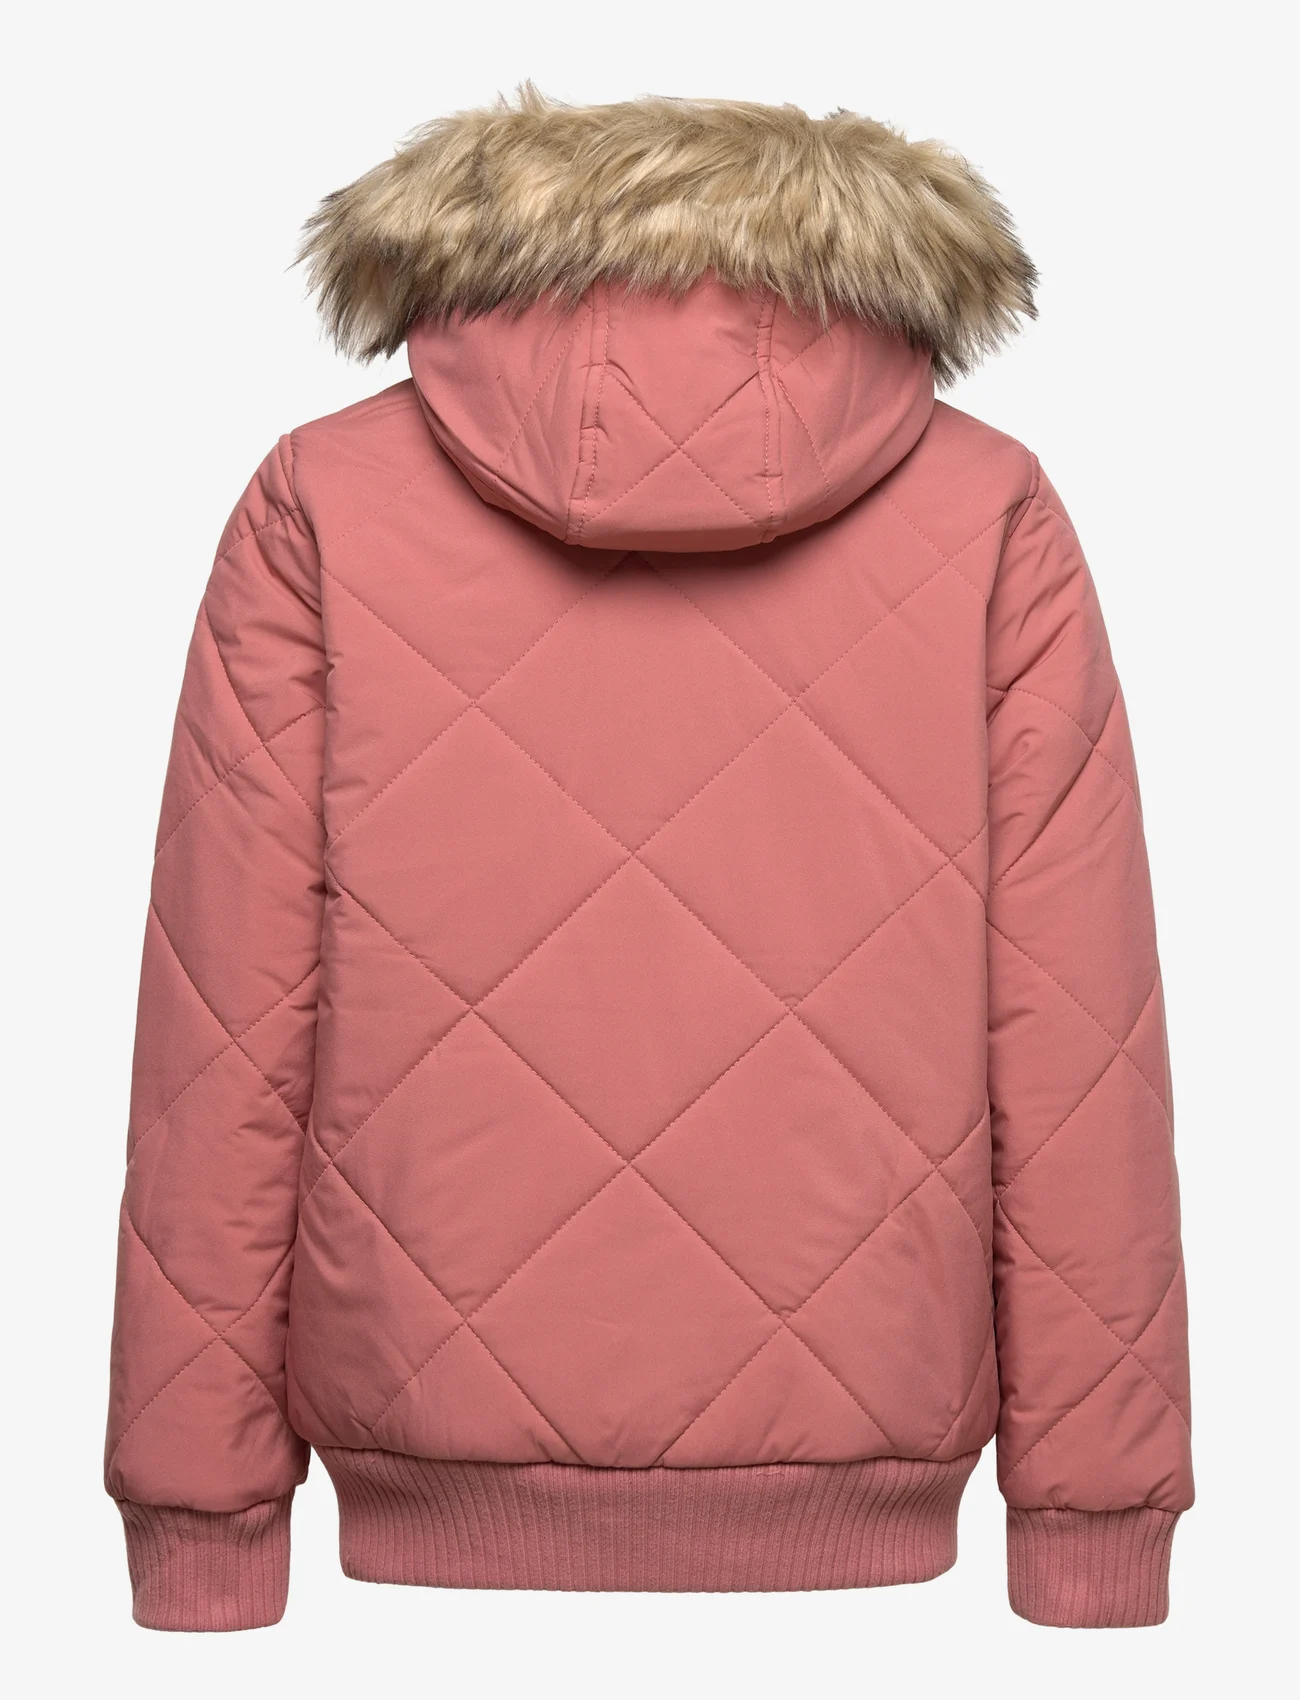 Abercrombie & Fitch - kids GIRLS OUTERWEAR - dunjackor & fodrade jackor - withered rose - 1